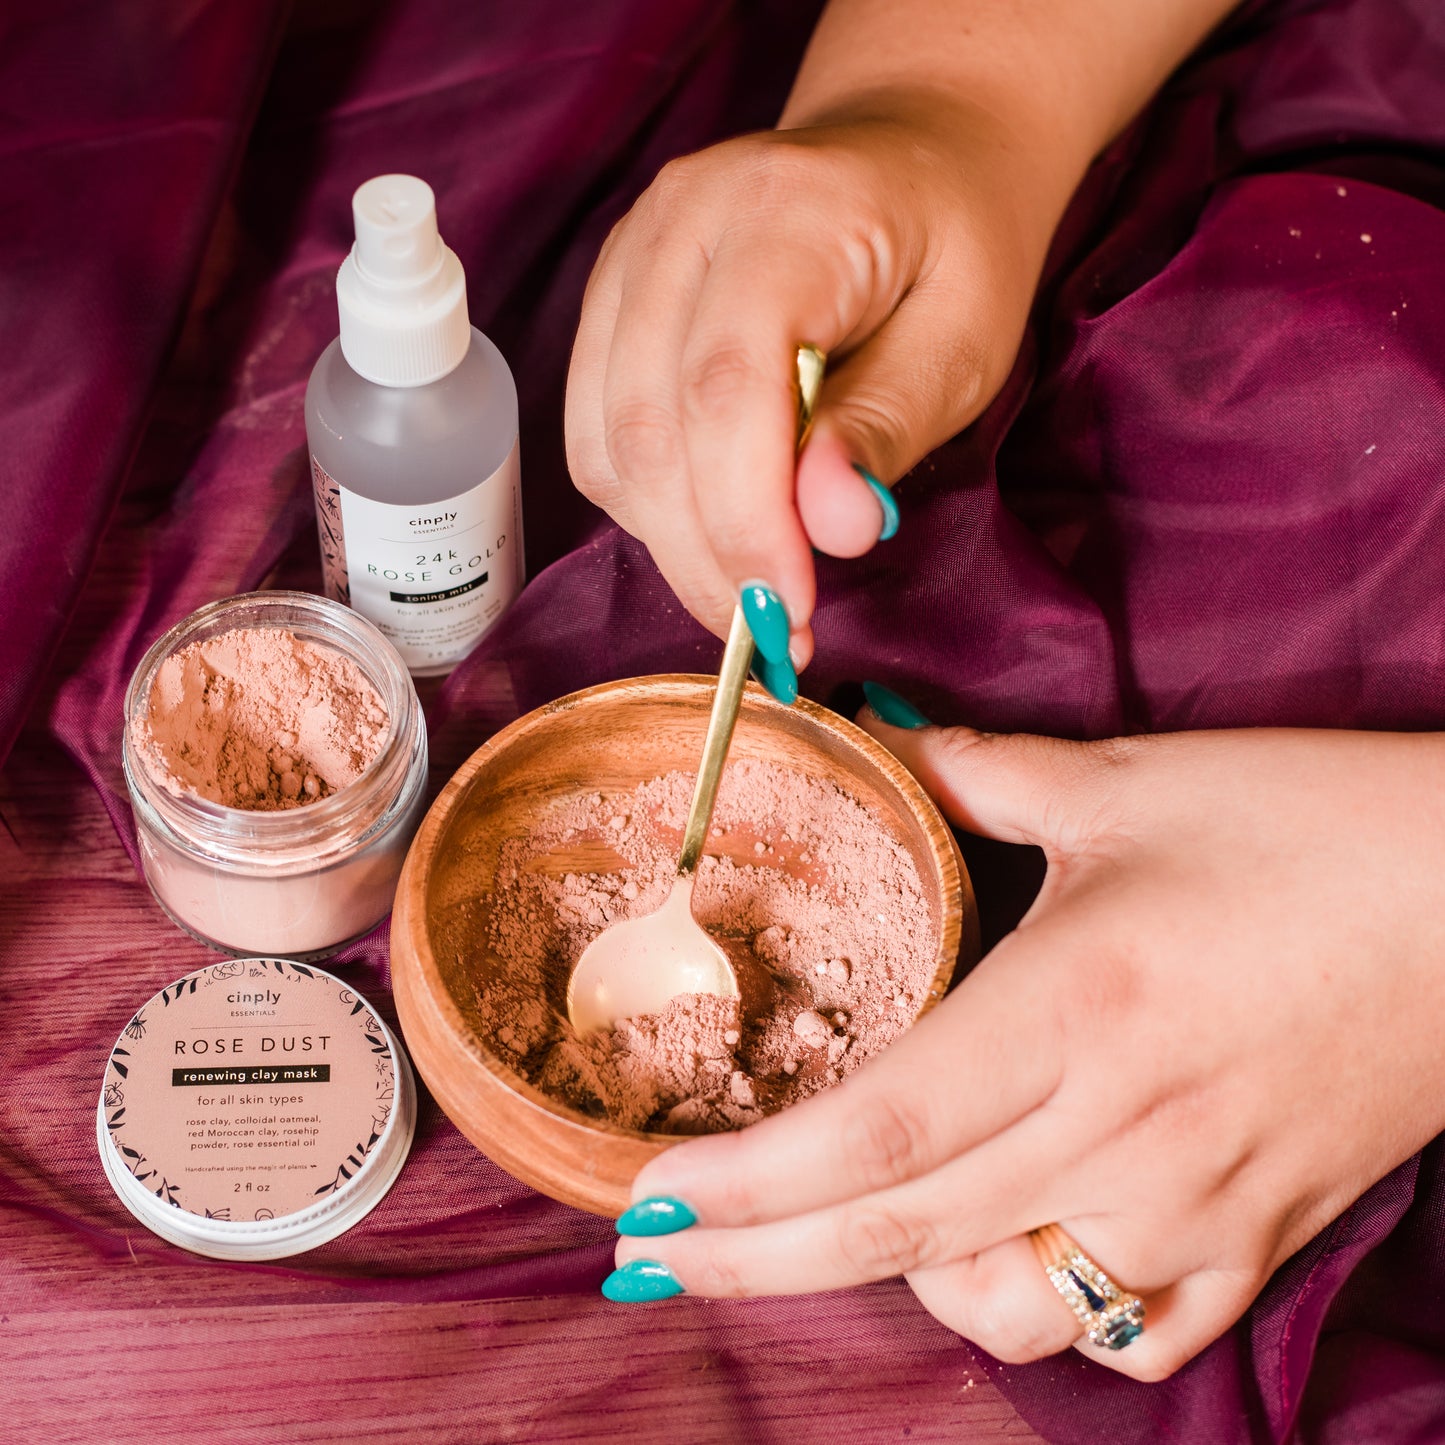 Rose Dust clay mask